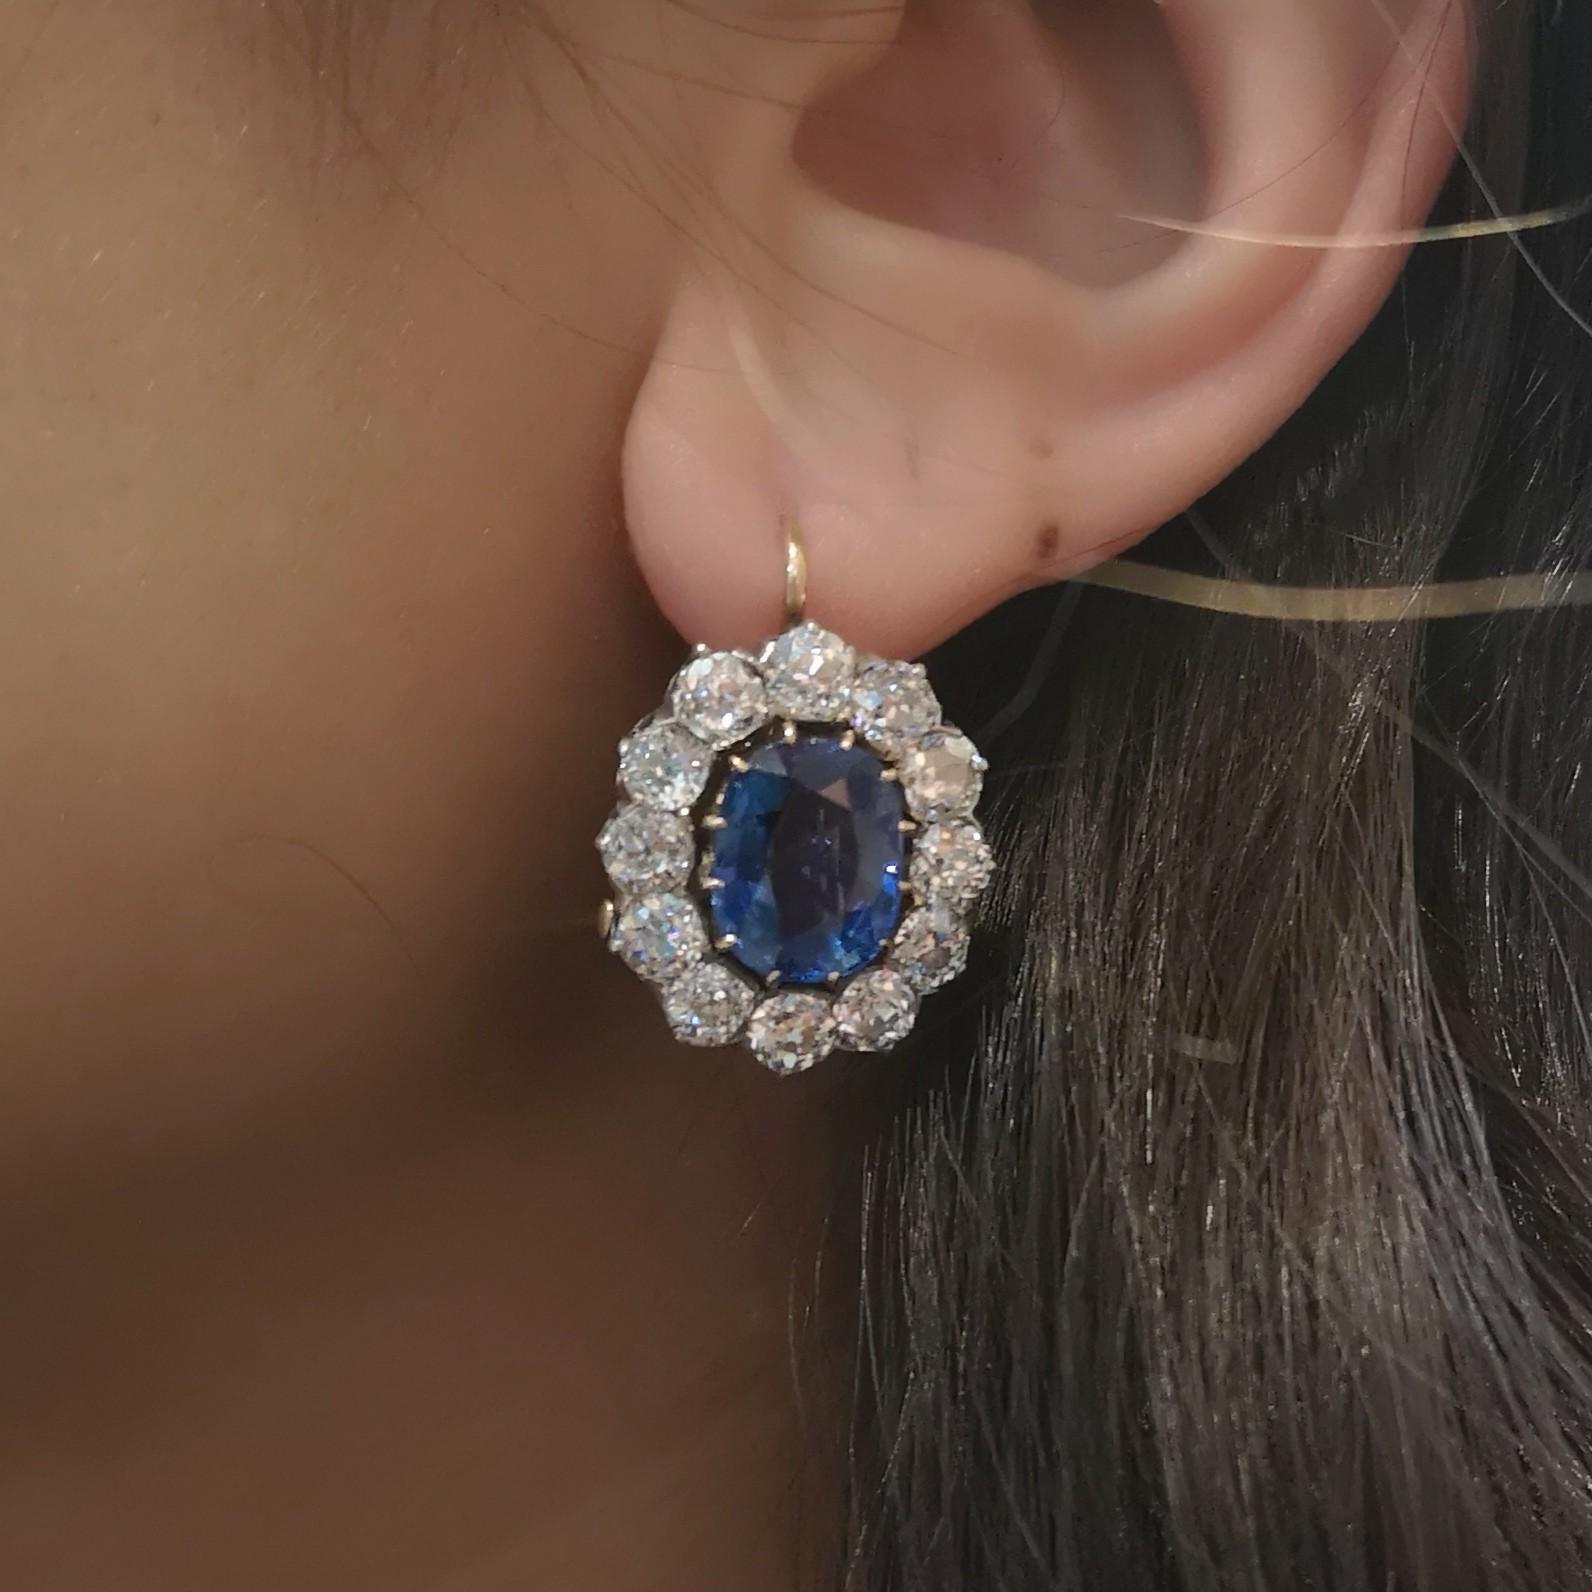 A pair of sapphire and diamond cluster earrings, set with cushion shaped faceted sapphires, with an estimated total sapphire weight of 10.00ct, surrounded by old-cut diamonds, in platinum claw settings upon gold, circa 1890.
Accompanied by SSEF